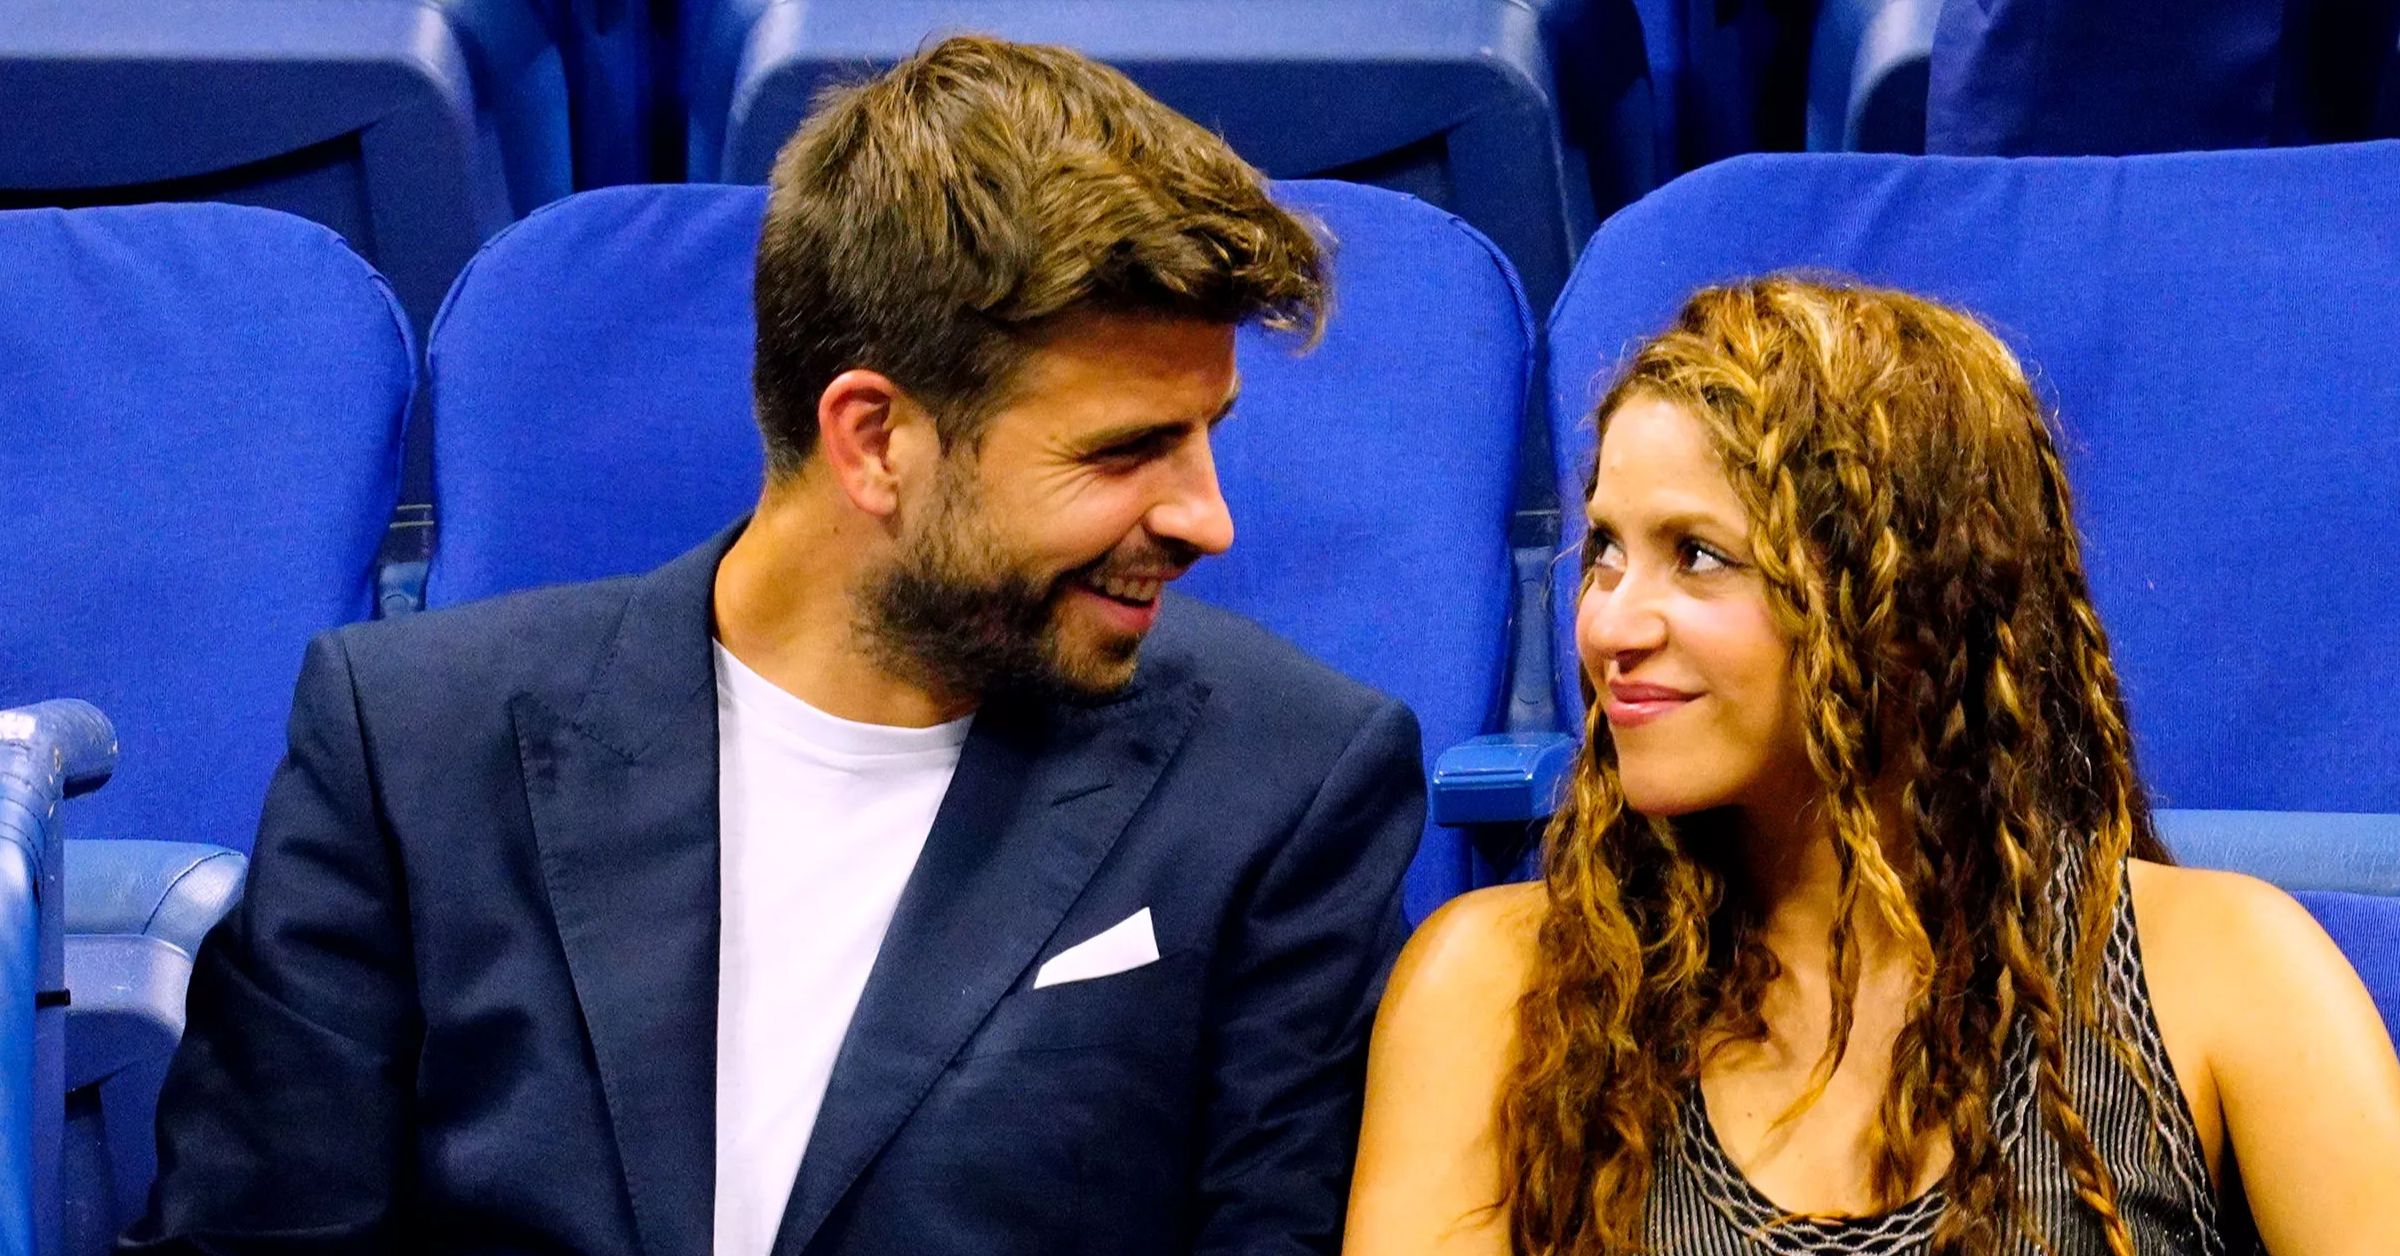 Who was shakira dating before gerard pique